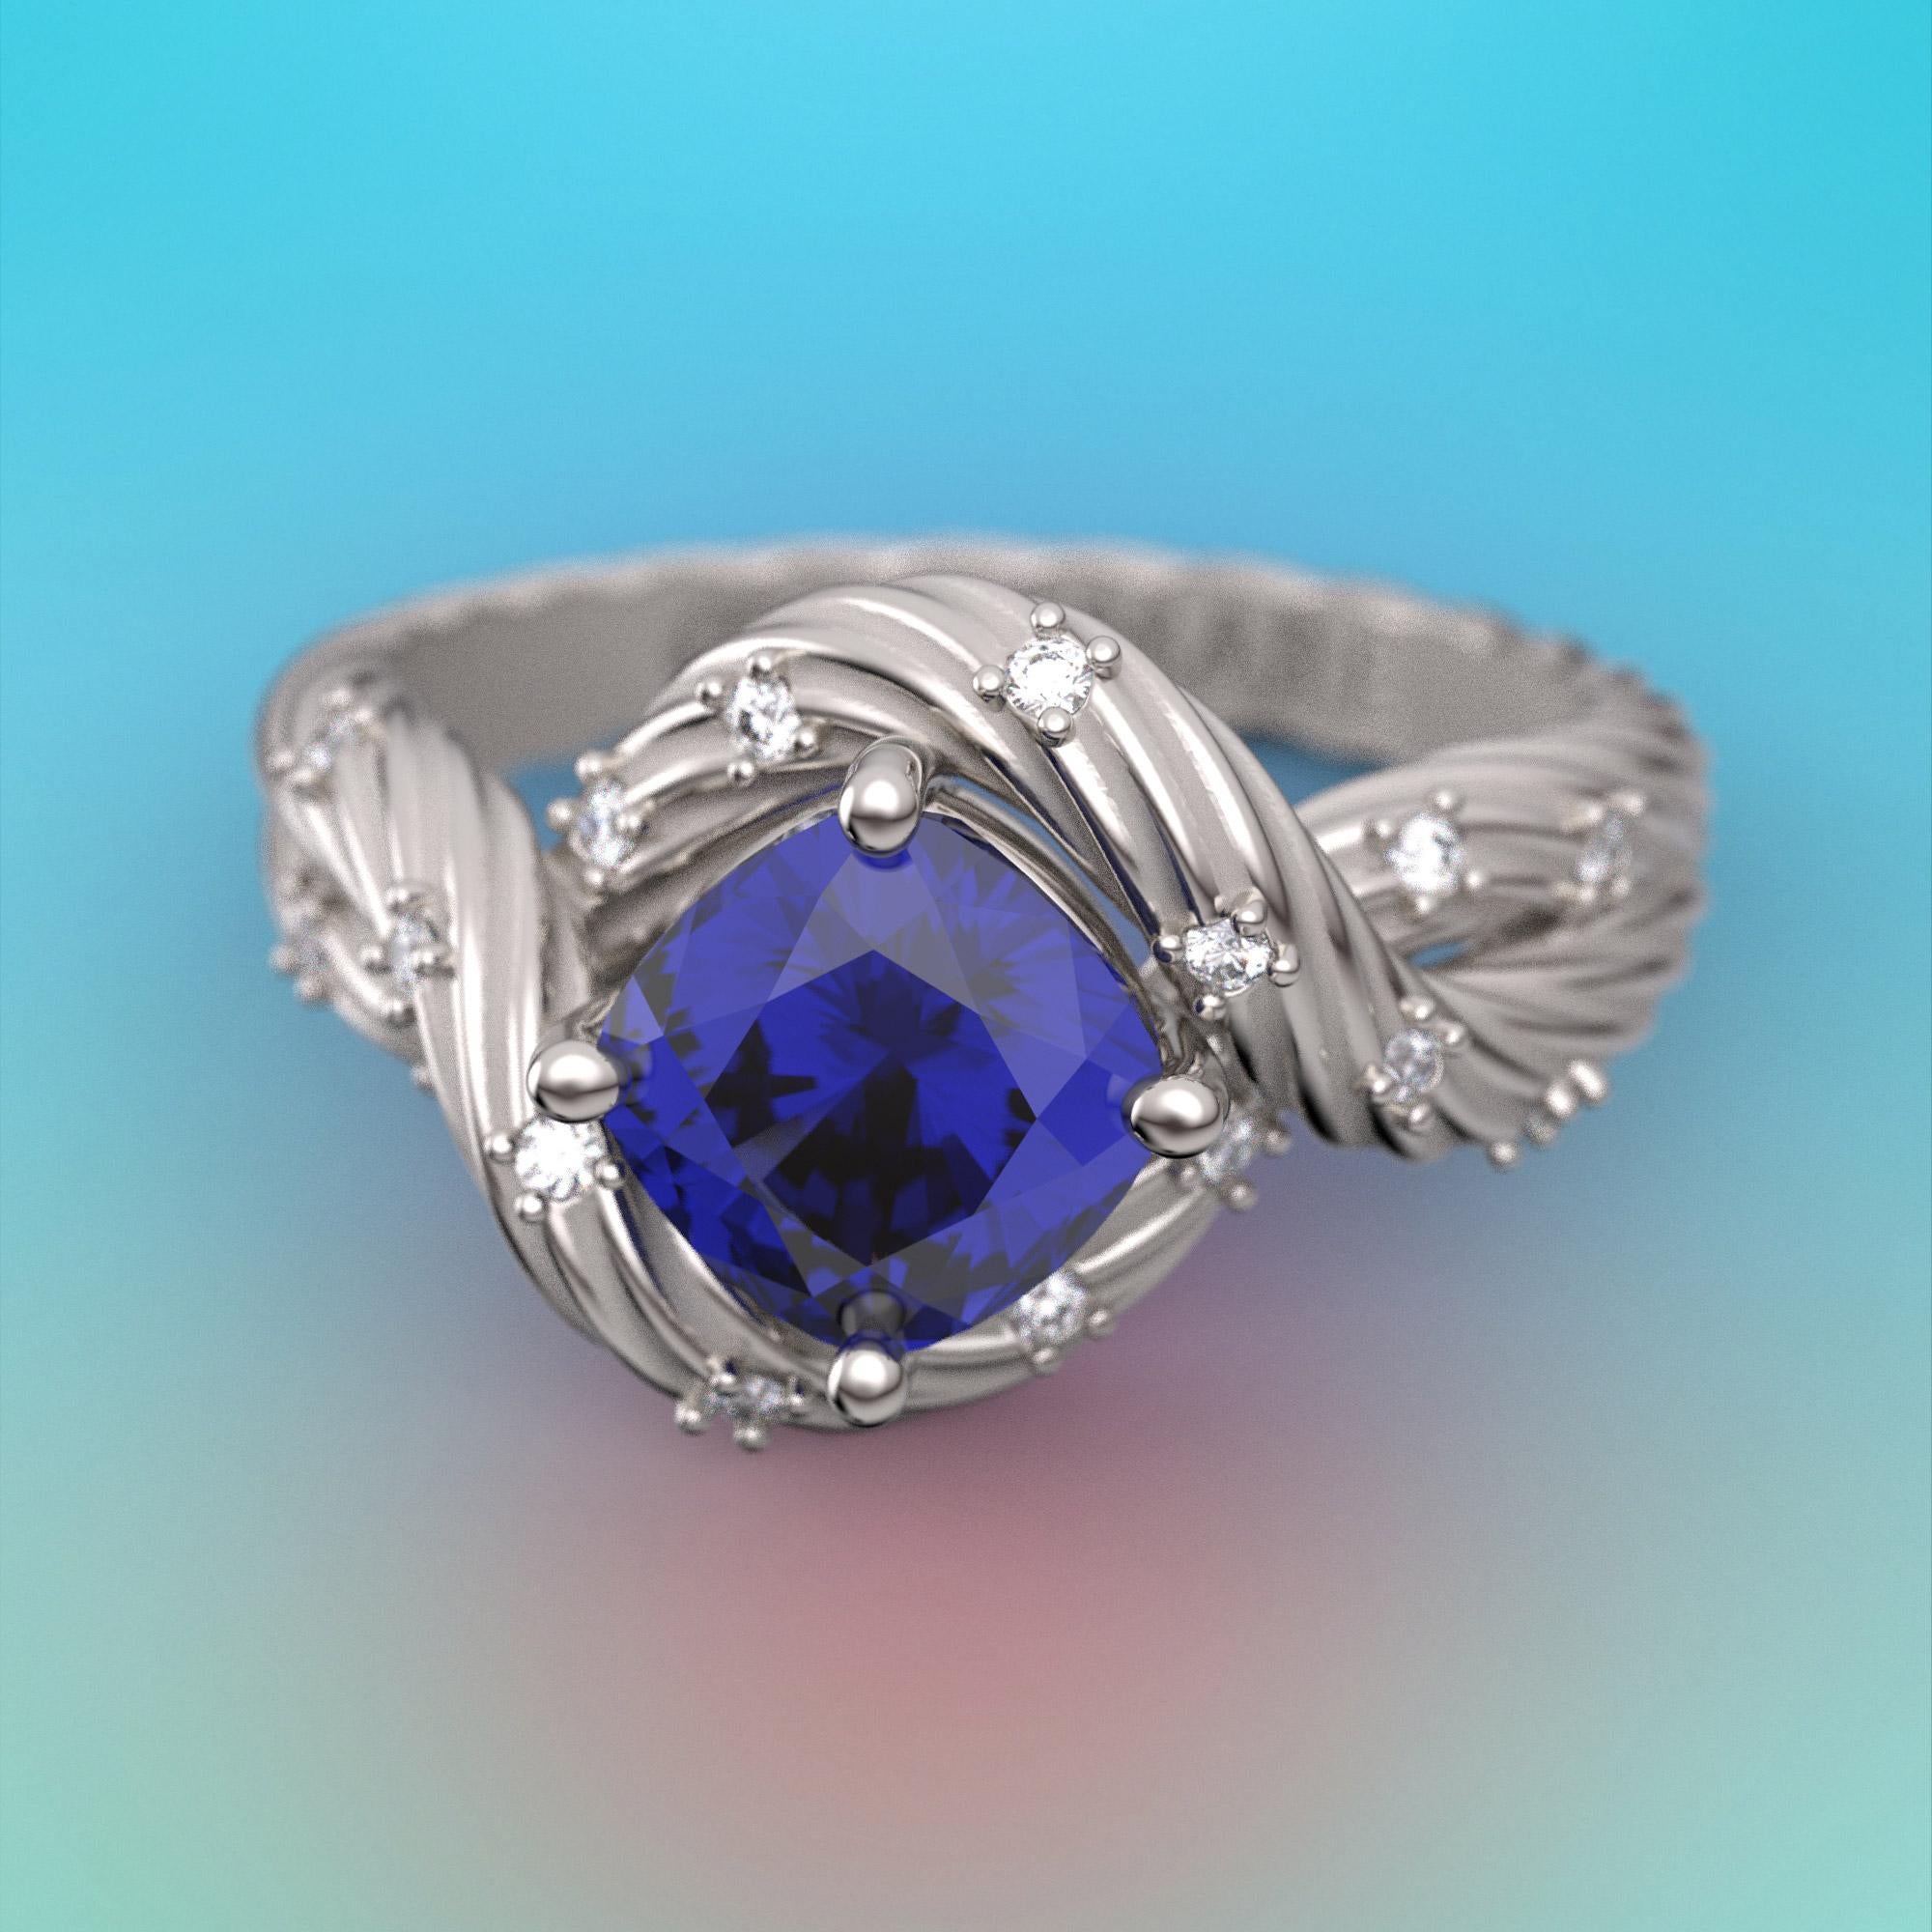 For Sale:  Tanzanite and Diamonds Ring 14k Solid Gold, Italian Fine Jewelry, made to order. 17